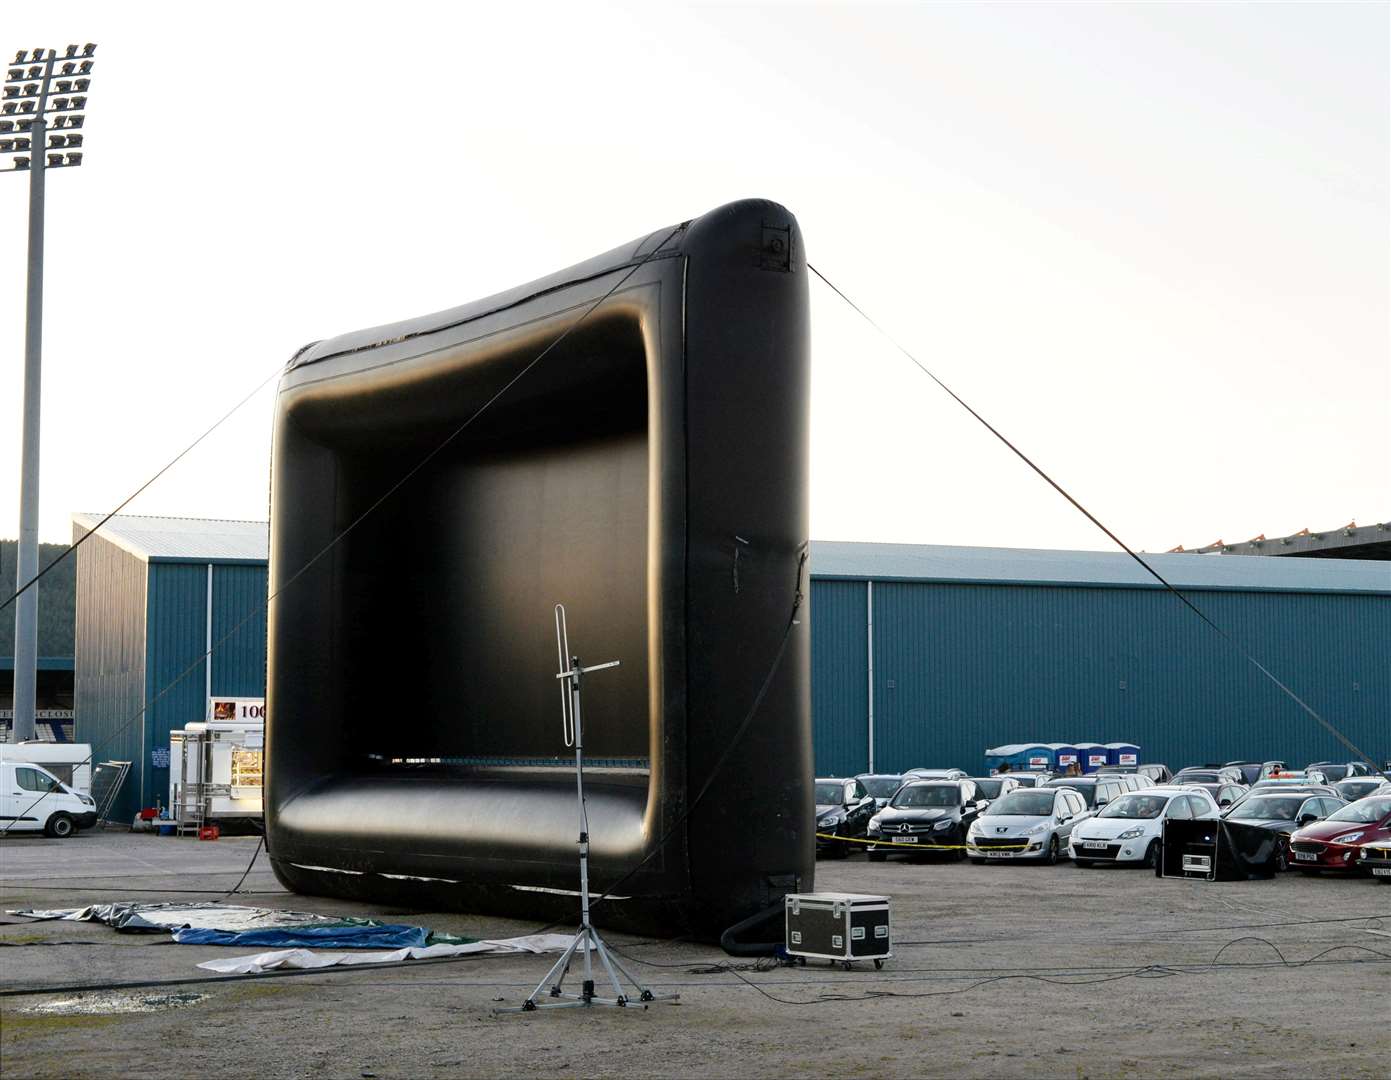 The giant inflatable screen tethered in place. Picture: James Mackenzie